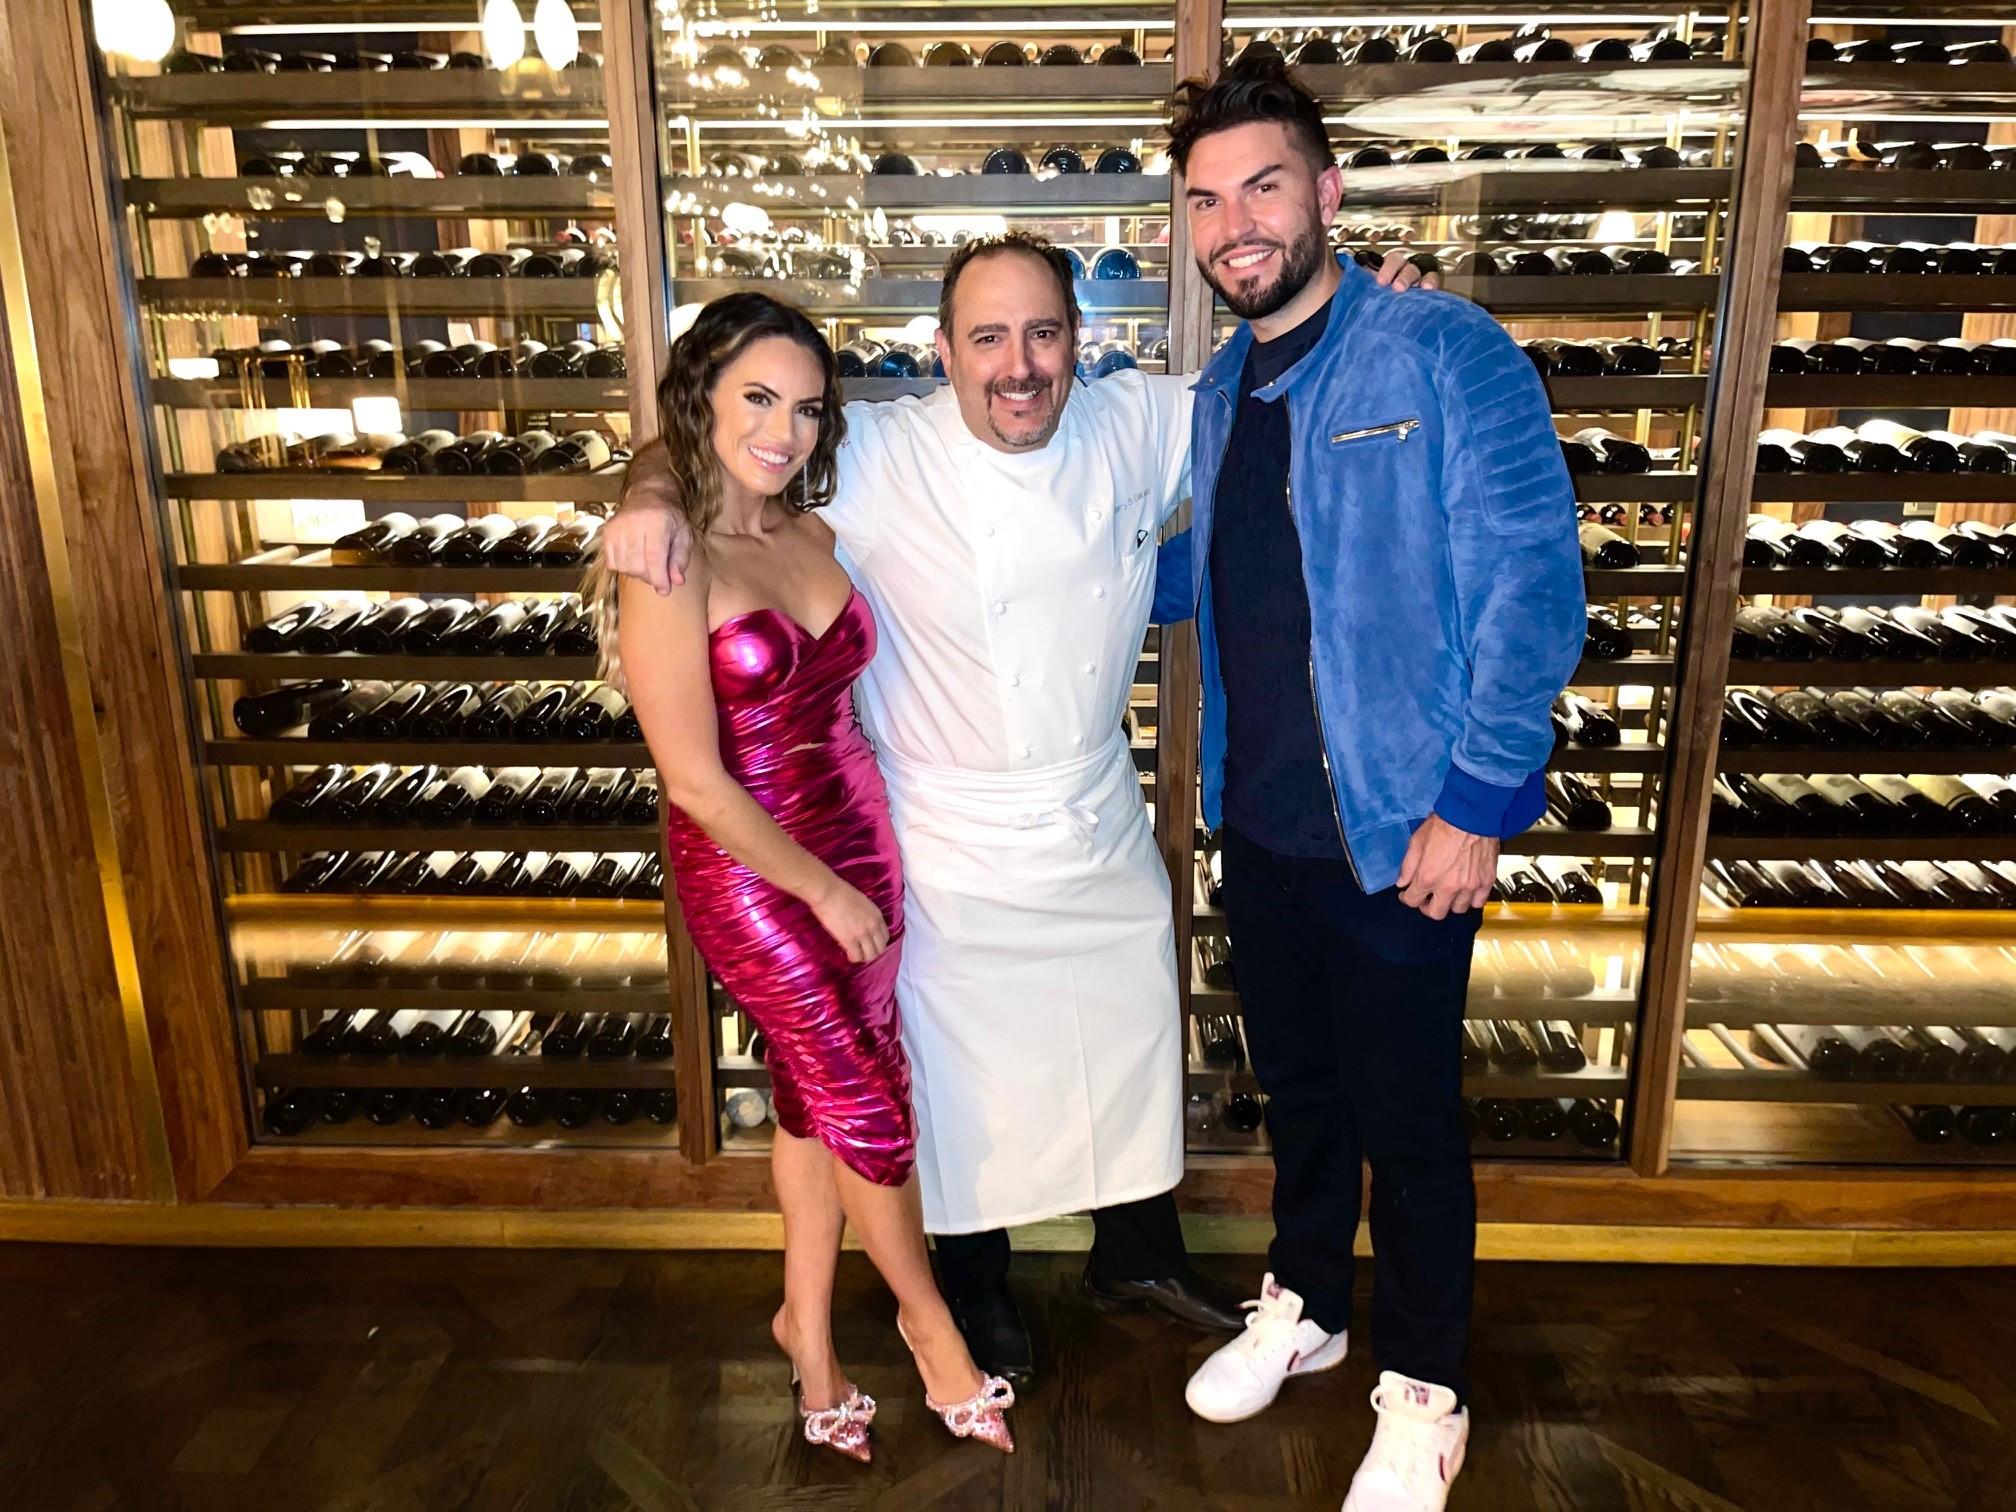 ‘MLB’ Star Eric Hosmer Slides Into Downtown Las Vegas For Amazing Weekend!